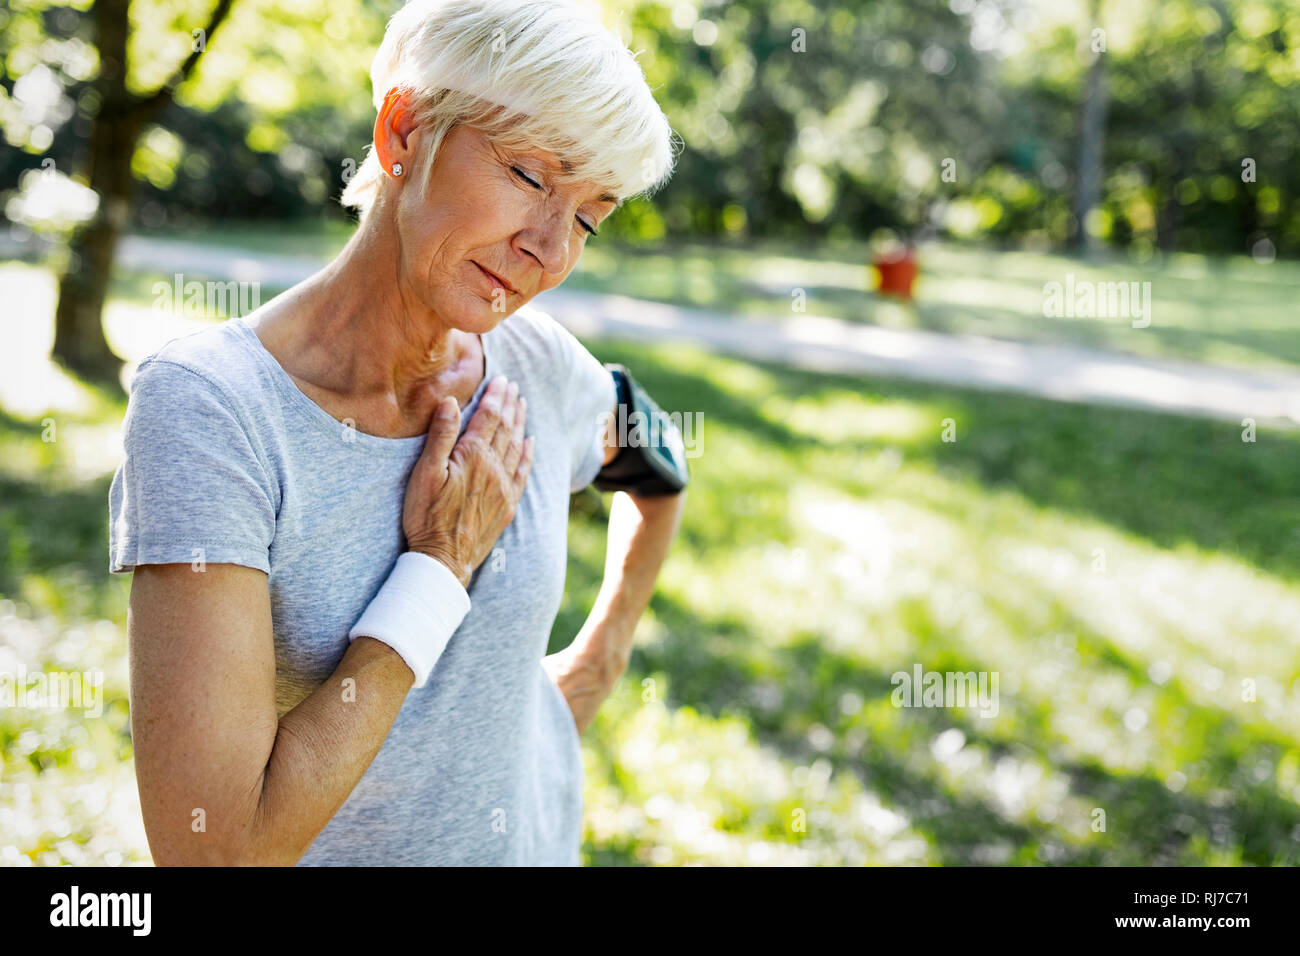 Senior woman with chest pain suffering from heart attack during jogging Stock Photo